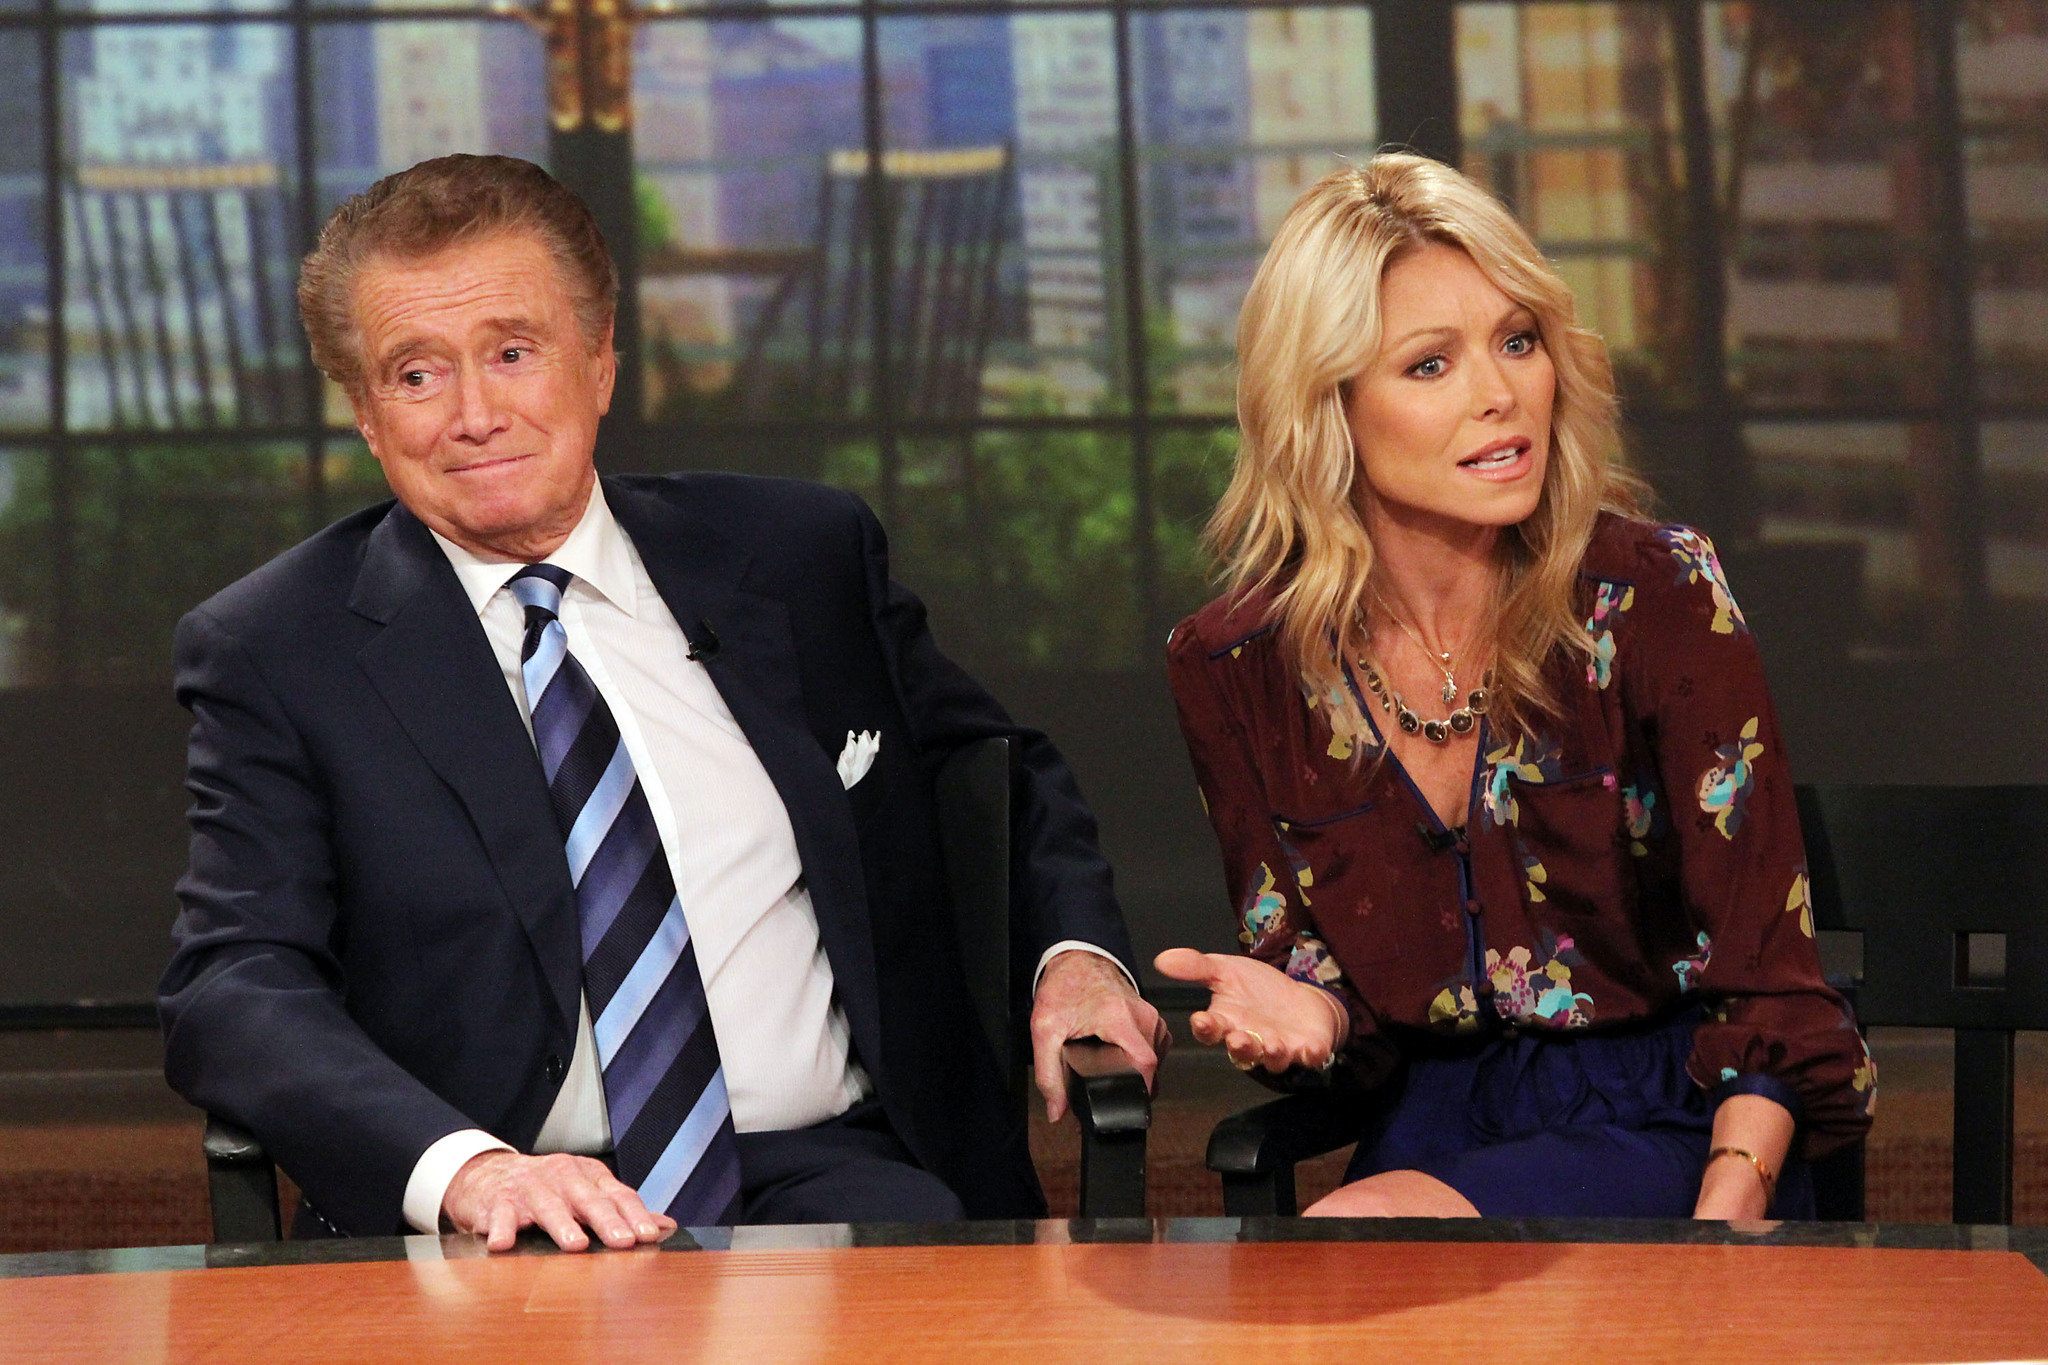 Regis Philbin and Kelly Ripa on Live! with Regis and Kelly